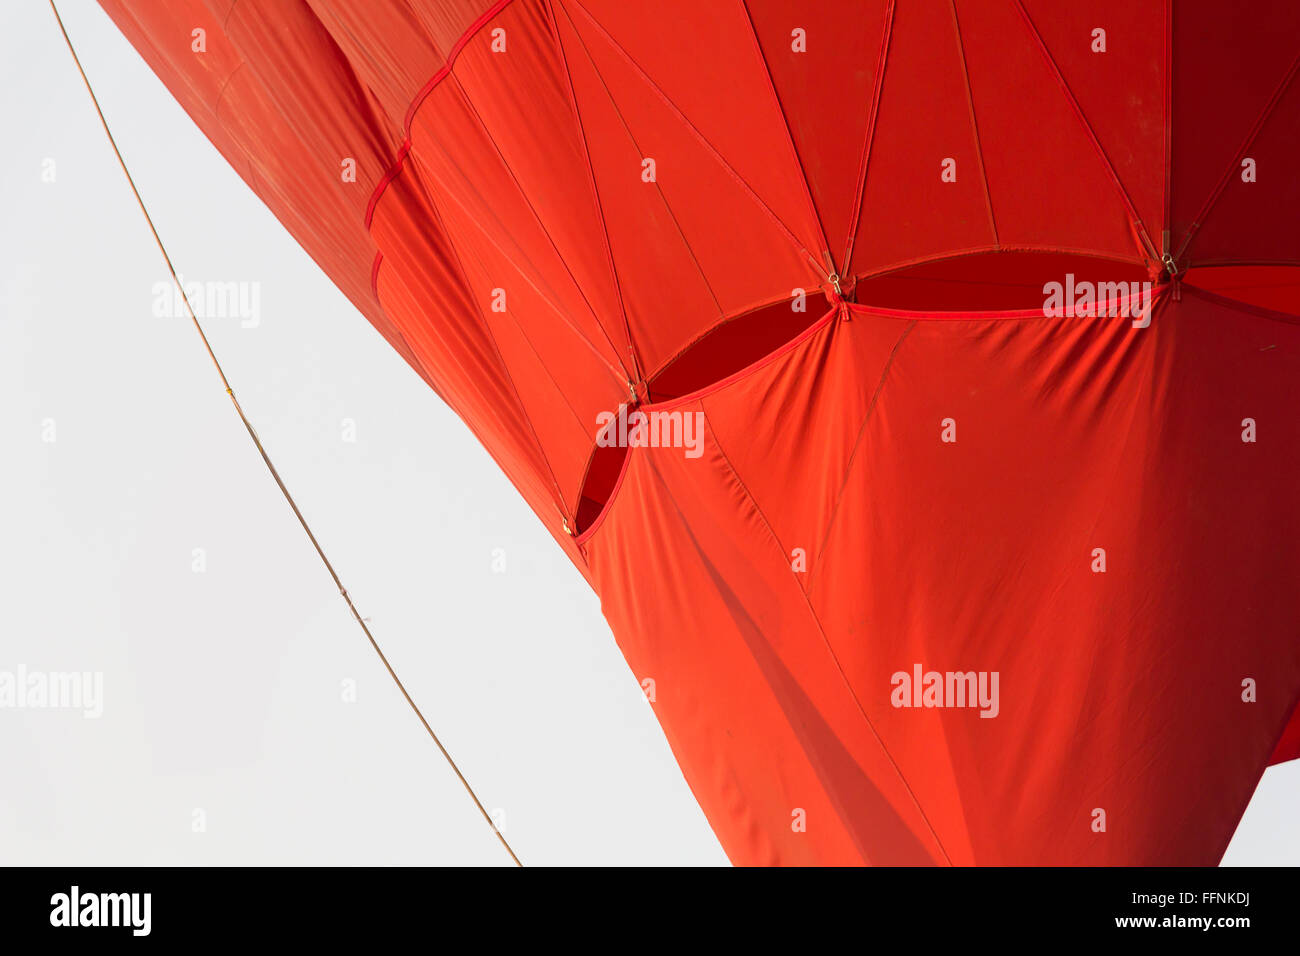 part of red hot air balloon fabric picture Stock Photo